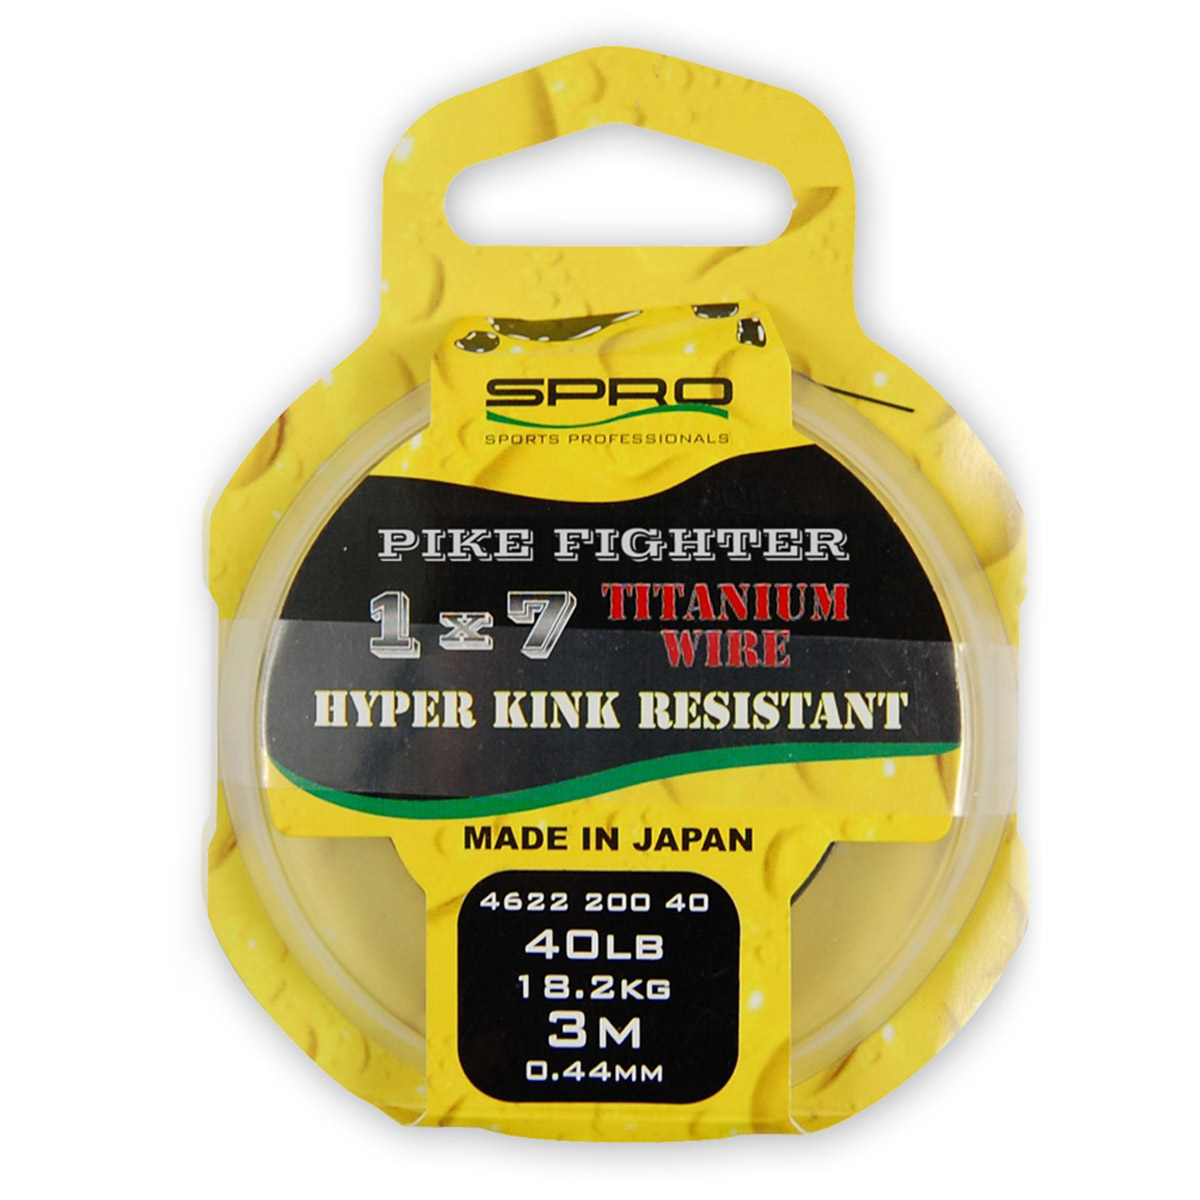 Spro Pike Fighter Titanium Wire -  17 lbs